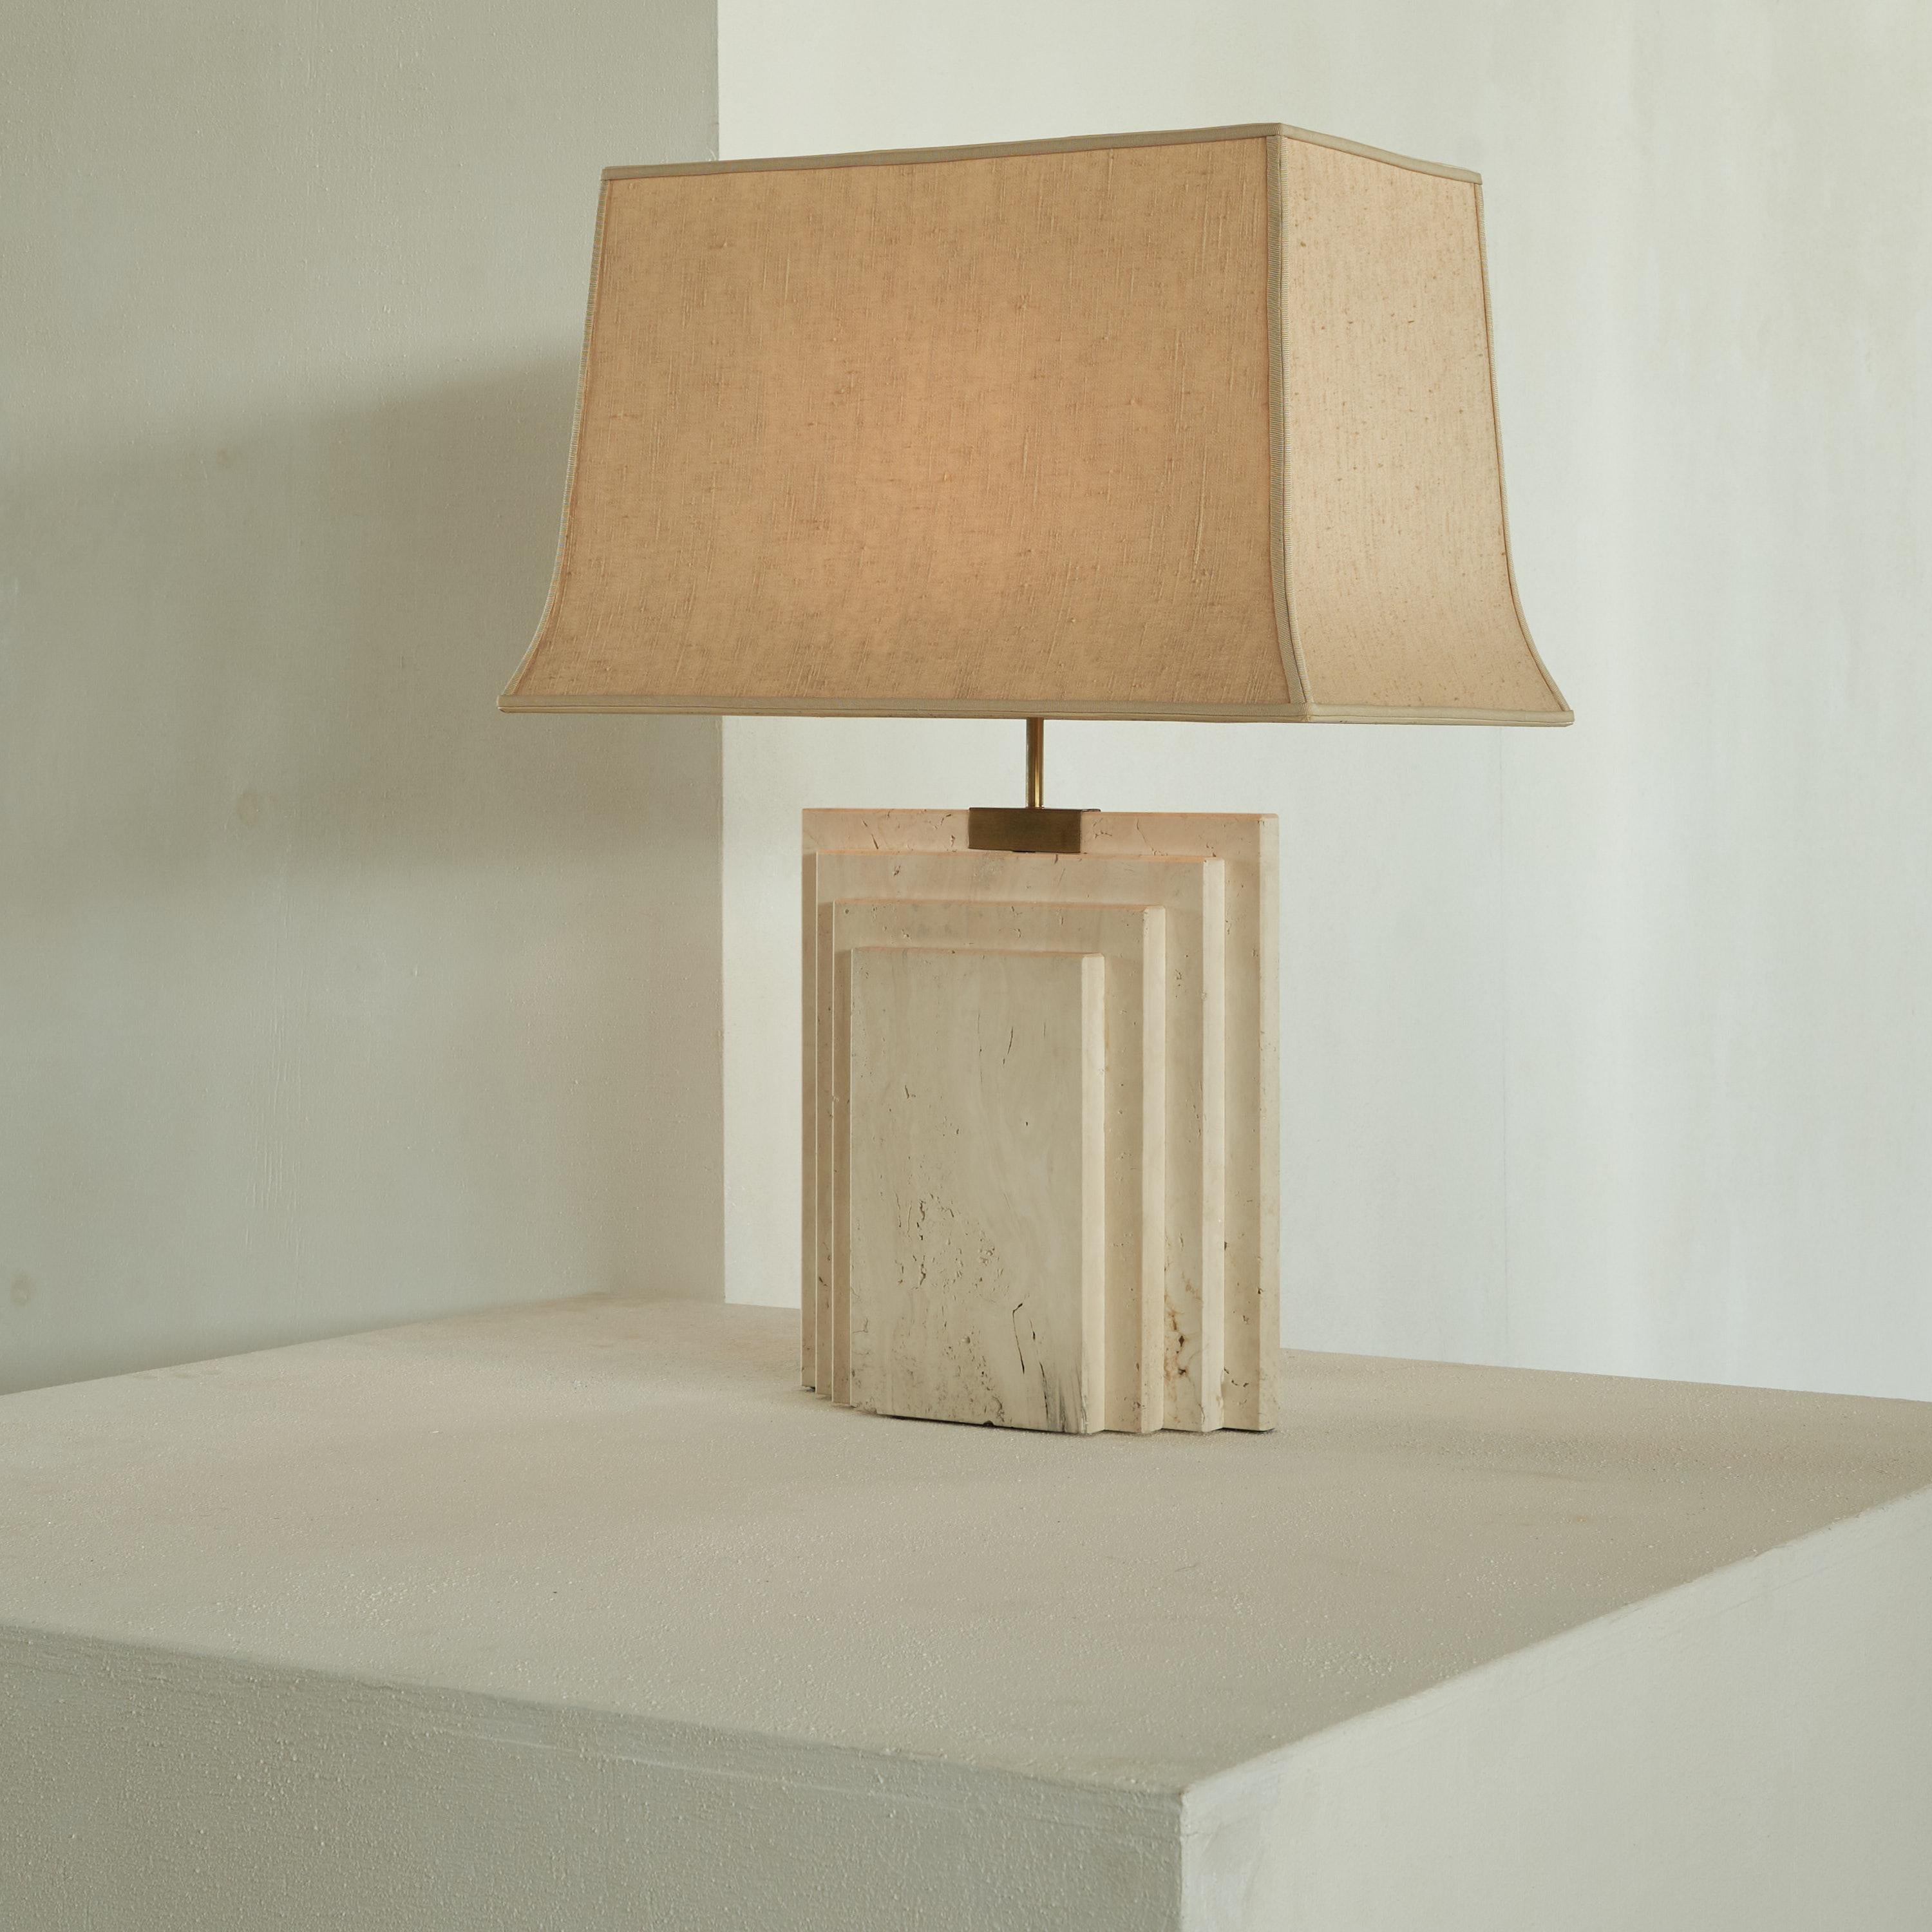 Architectural Table Lamp in Travertine and Brass, Belgium, 1970s For Sale 2